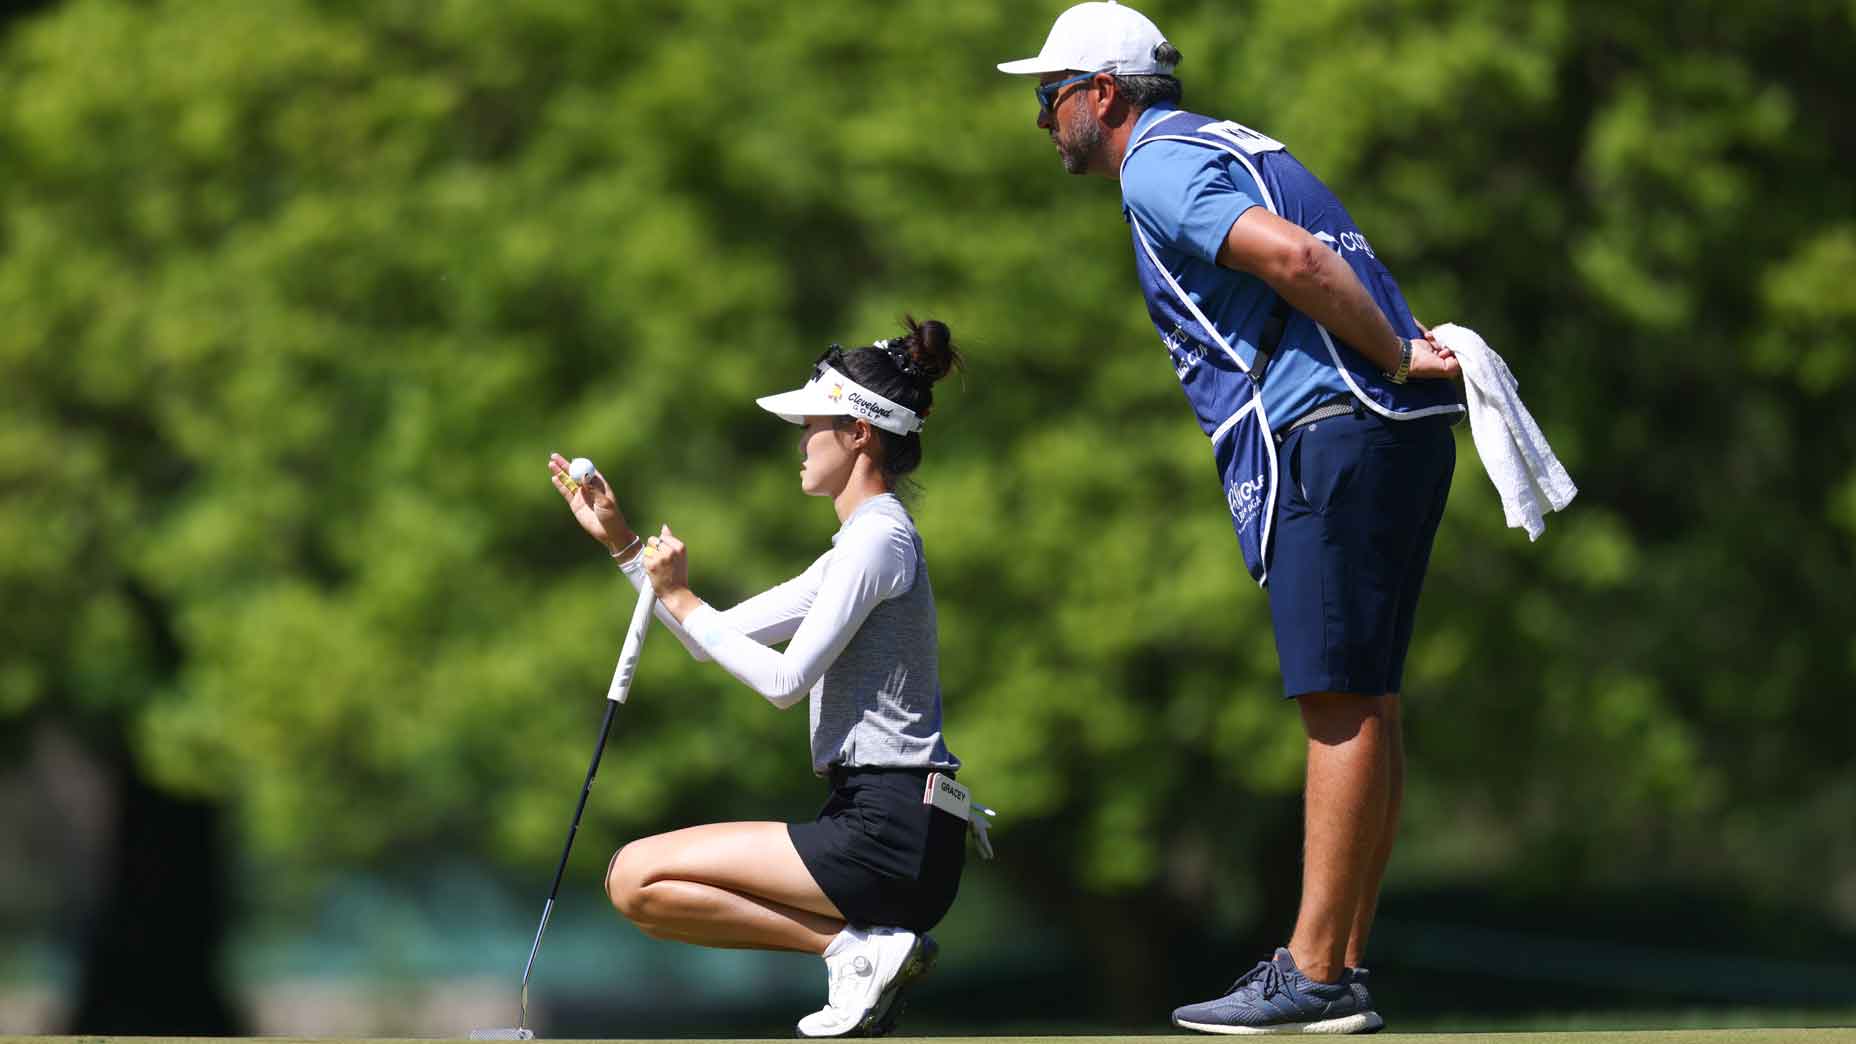 Want to dial in your speed on the greens? Try closing your eyes, LPGA pro says.